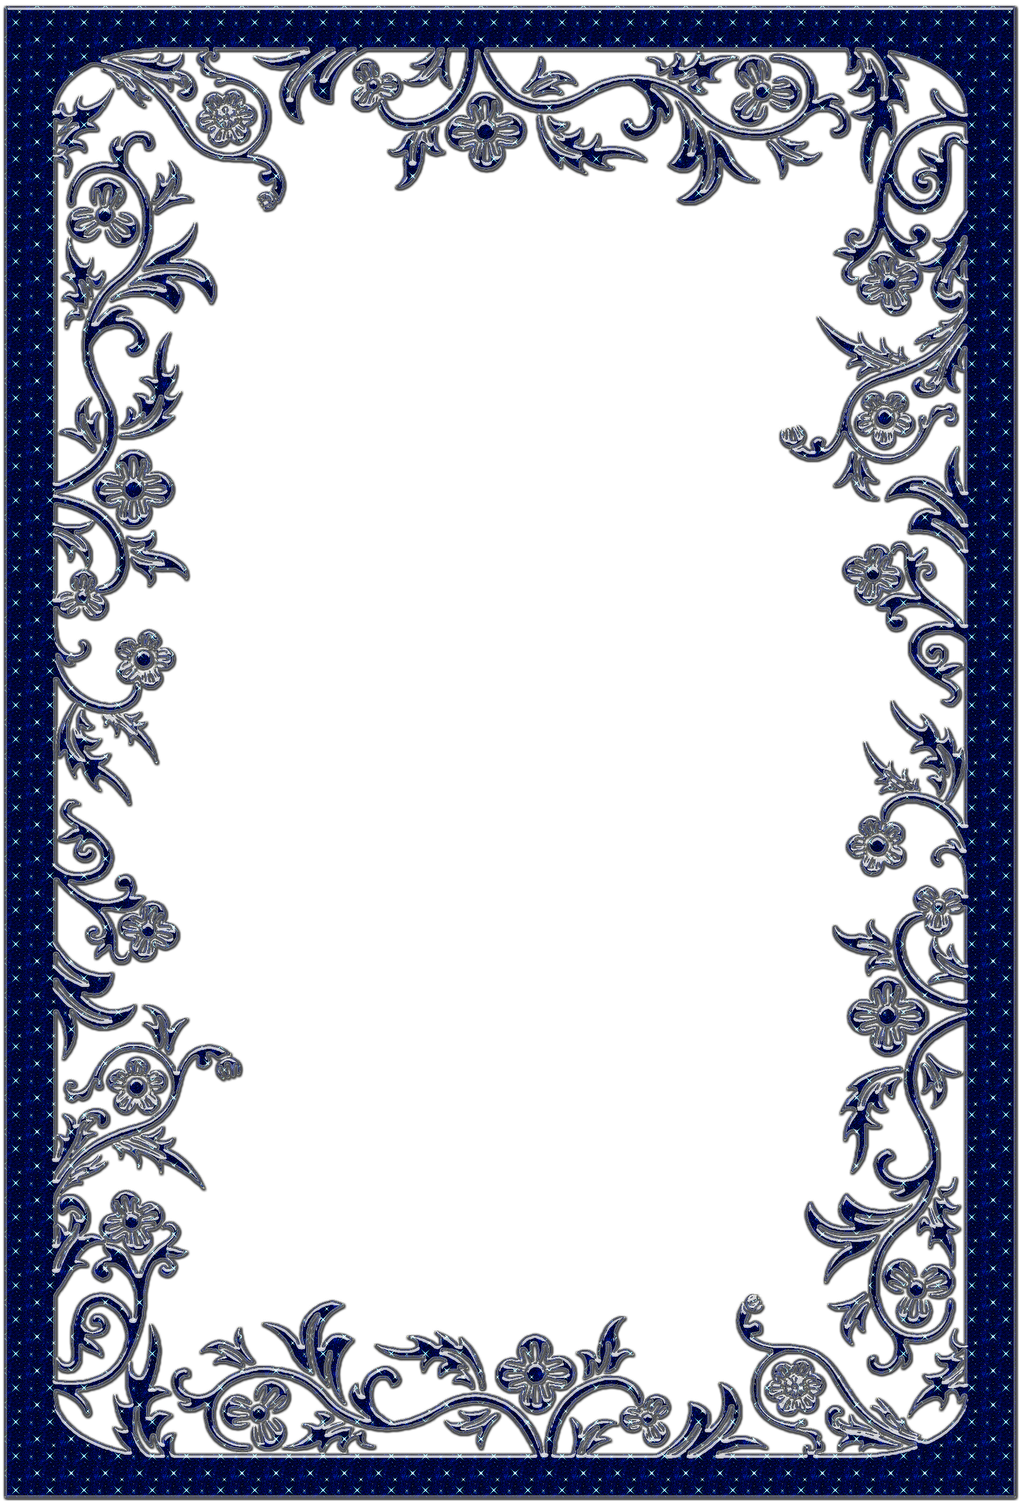 A Blue And White Floral Border